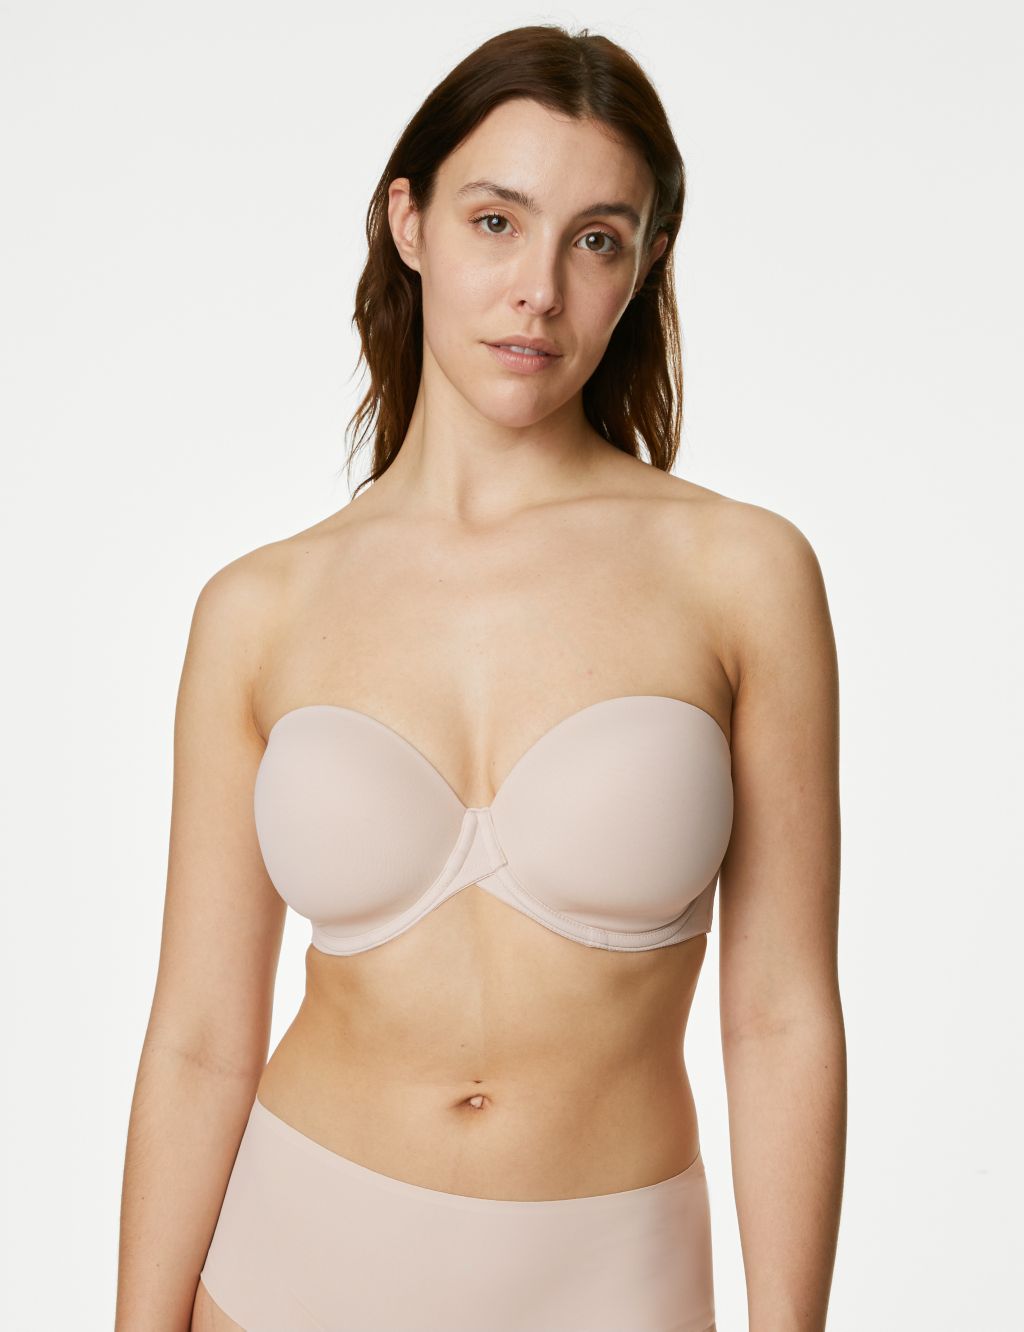 NEW! M&S Autograph Marks & Spencer nude non-padded fishnet detail plunge bra